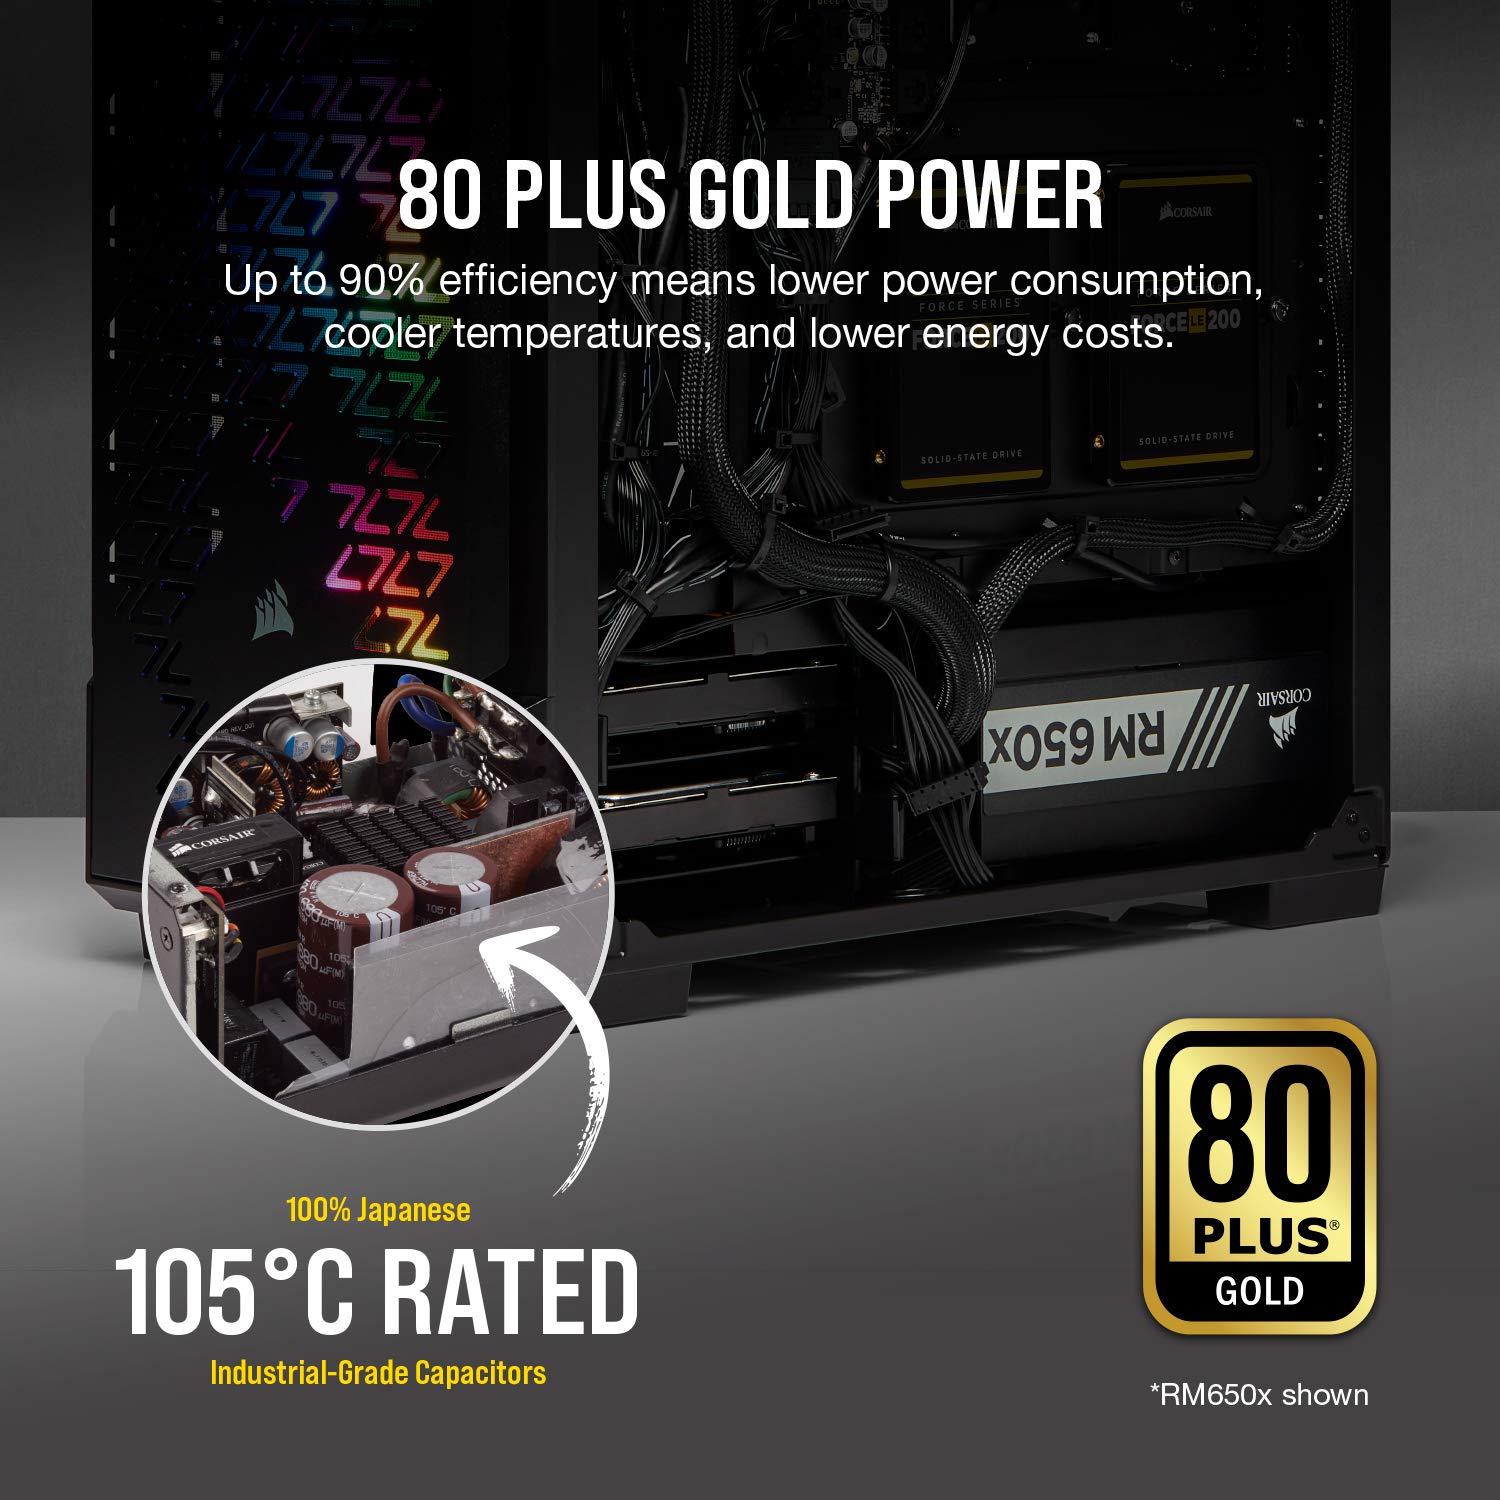 Corsair RMX Series, RM750x, 750 Watt, 80+ Gold Certified, Fully Modular Power Supply (Low Noise, Zero RPM Fan Mode, 105°C Capacitors, Fully Modular Cables, Compact Size) Black